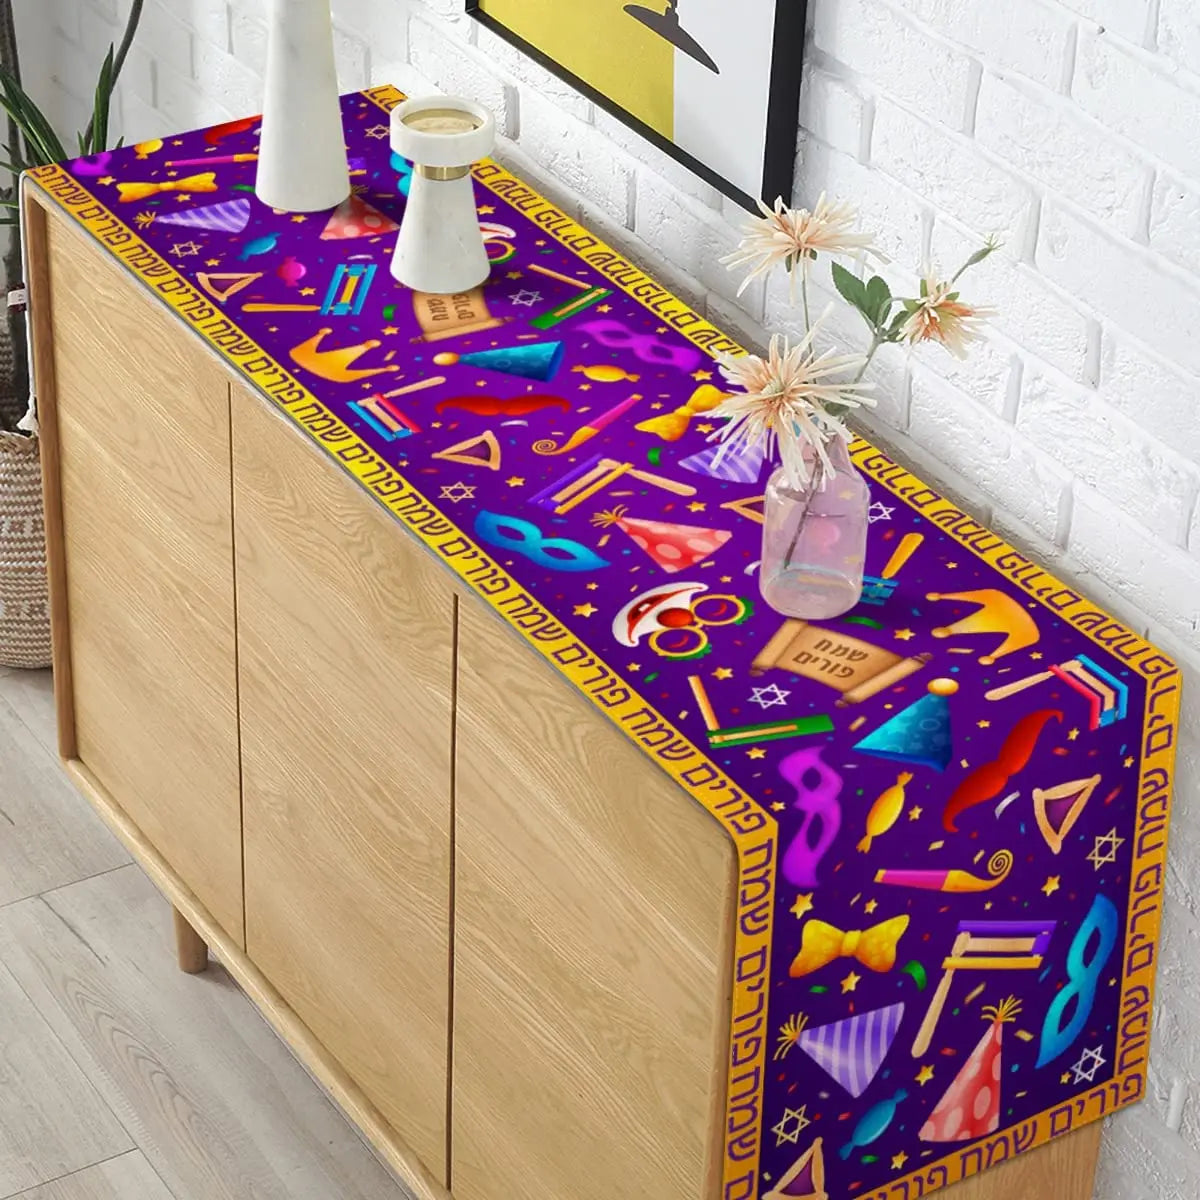 Happy Purim Table Runner Jewish Carnival Festival Holiday Decor Masque Circus Clown Table Runner Kitchen Dinning Decoration